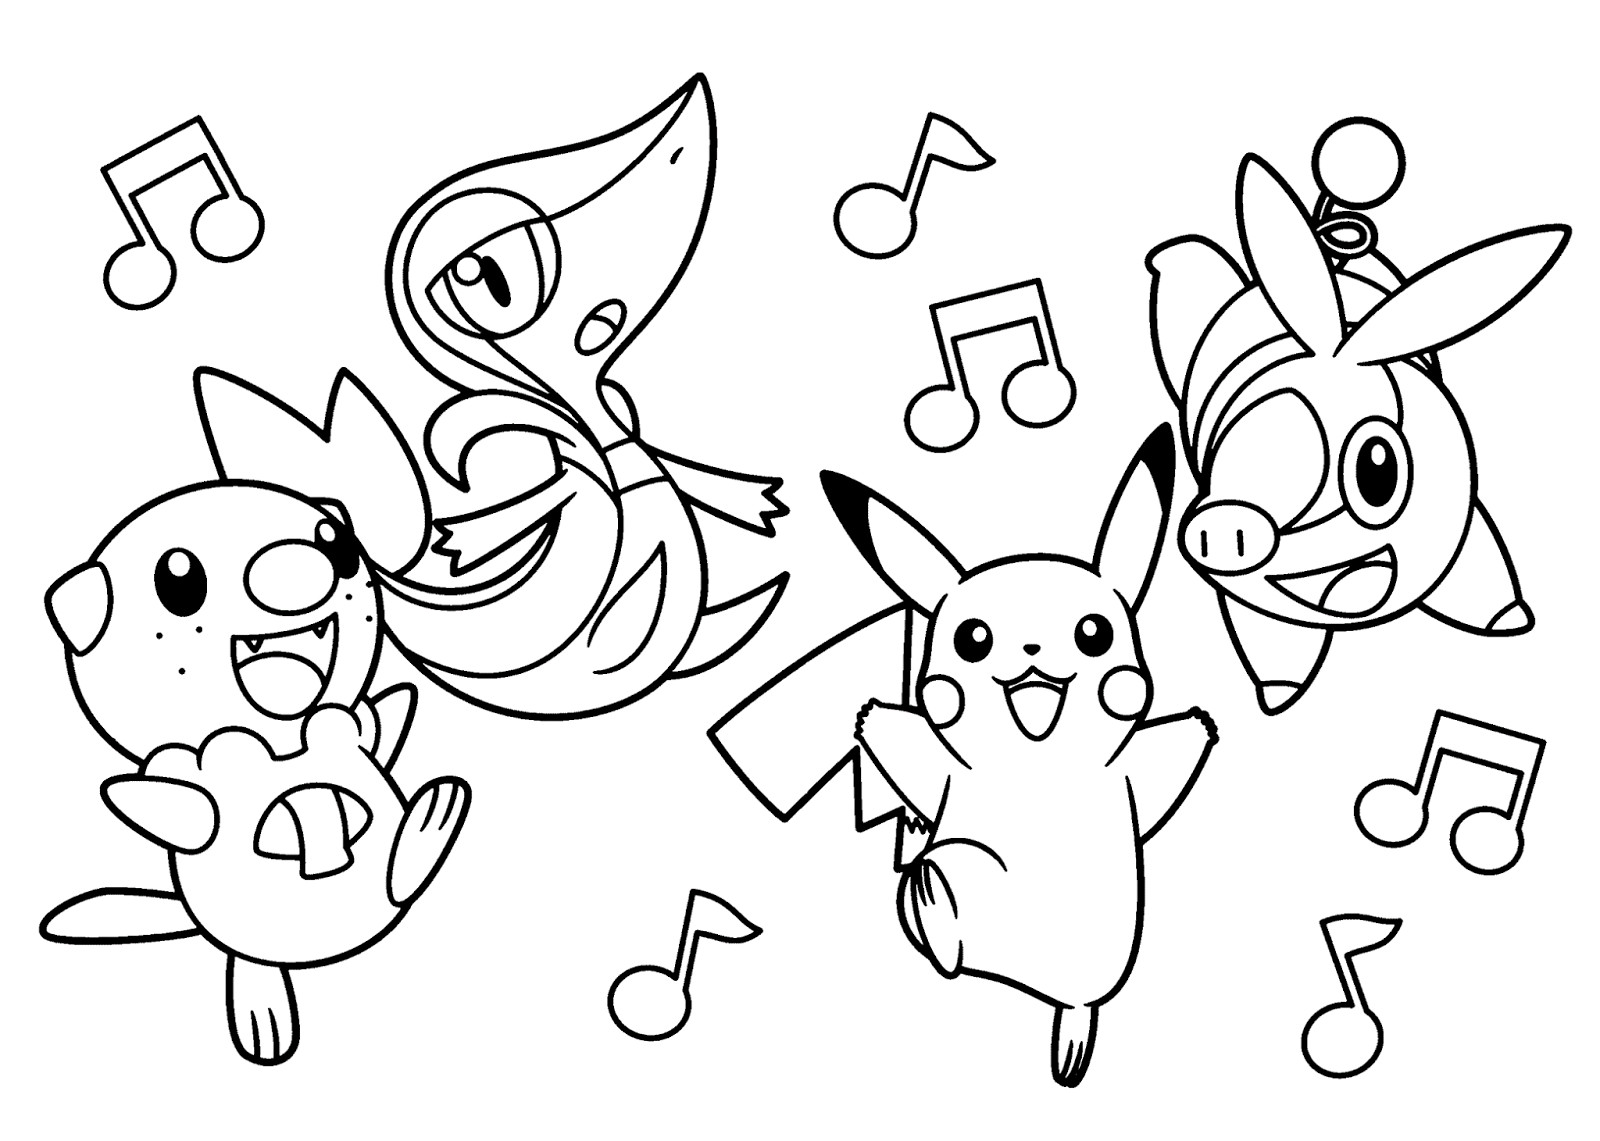 Free Coloring Pages Pokemon
 Free Pokemon Coloring Pages For Kids 2016